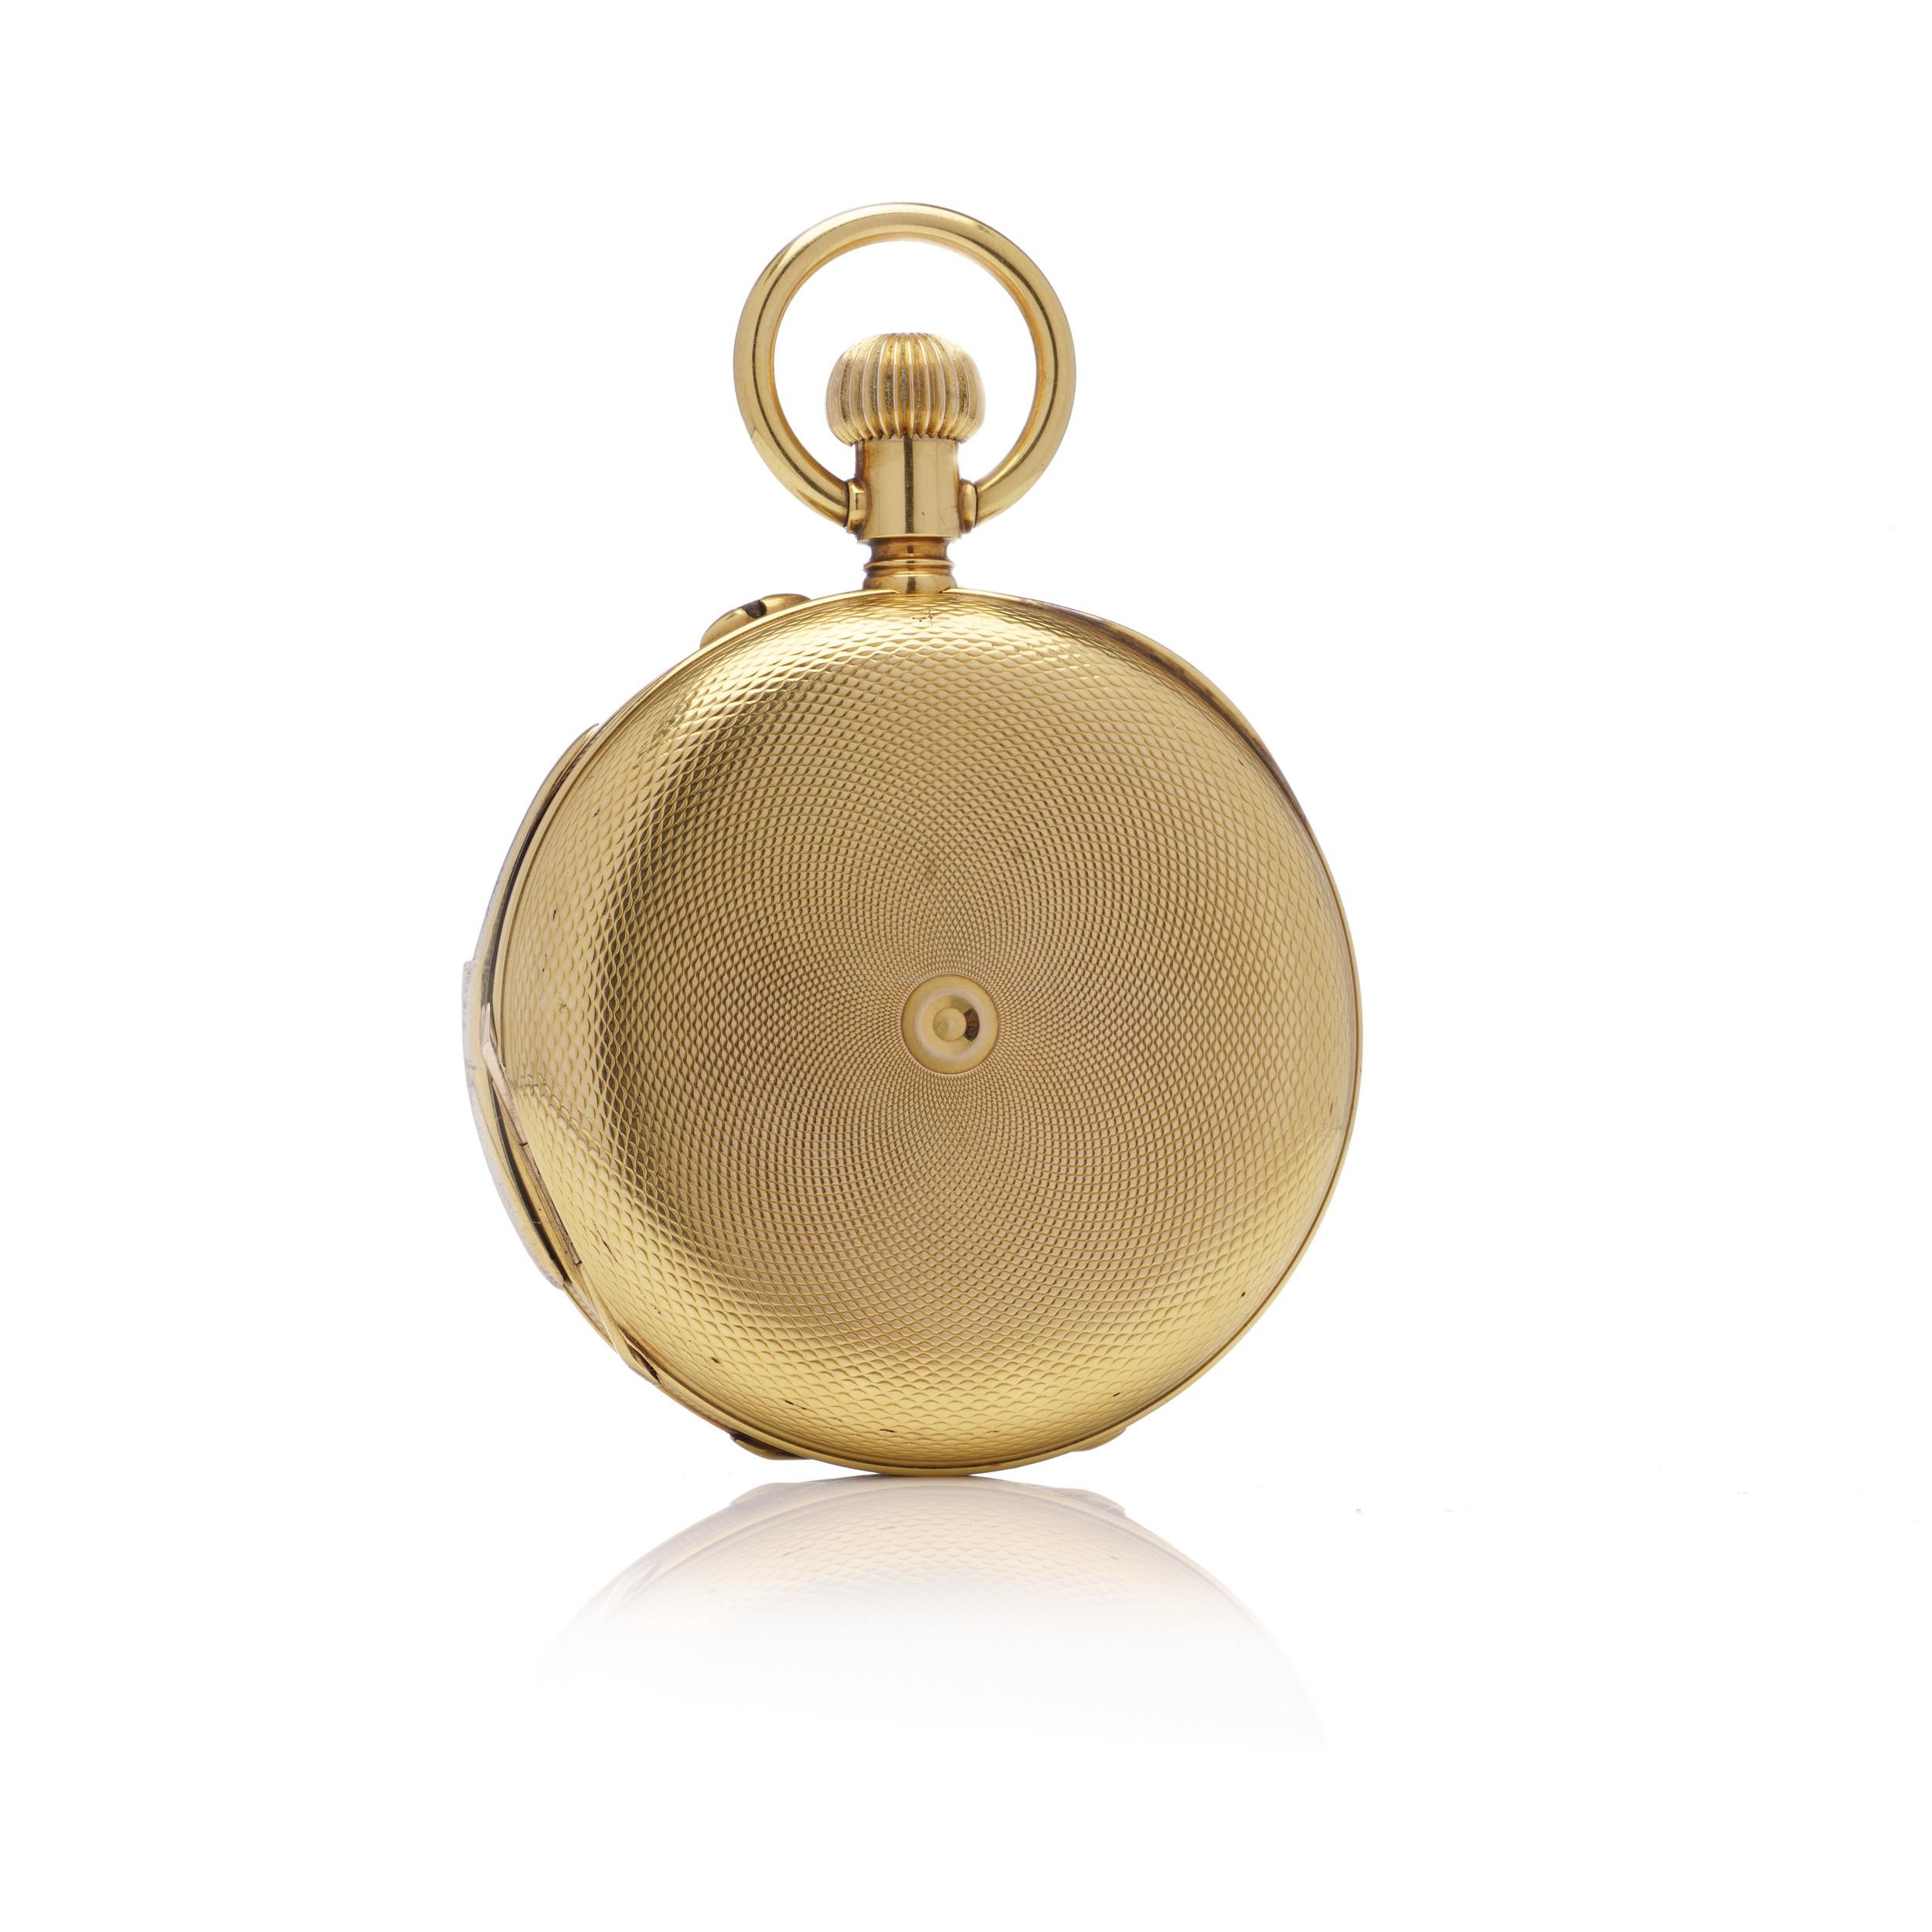 Hy Moser & Cie. 14kt gold quarter-repeater full hunter keyless pocket watch In Excellent Condition For Sale In Braintree, GB